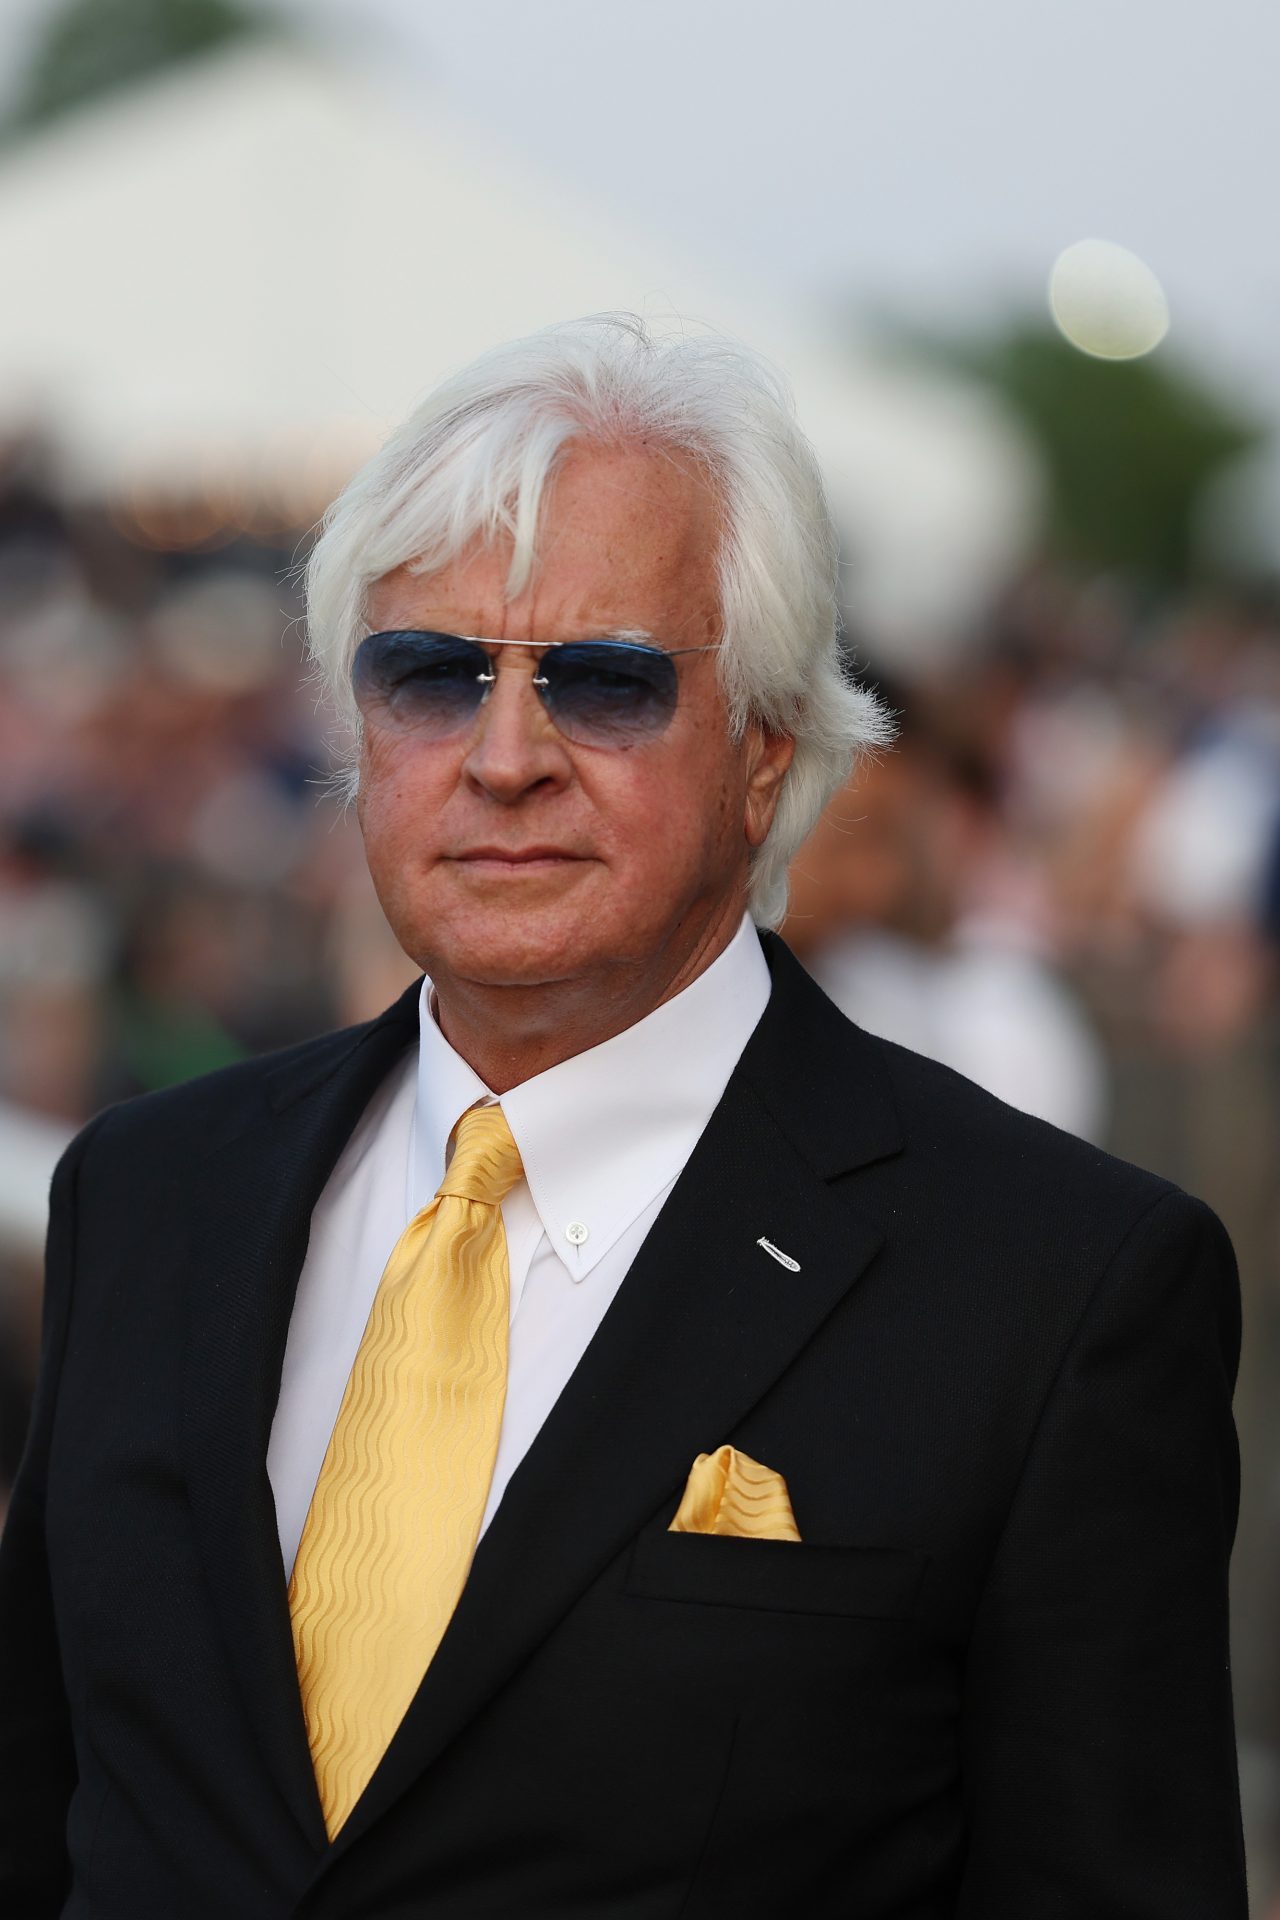 Bob Baffert’s horse racing legacy: Unbridled success and swirling controversy